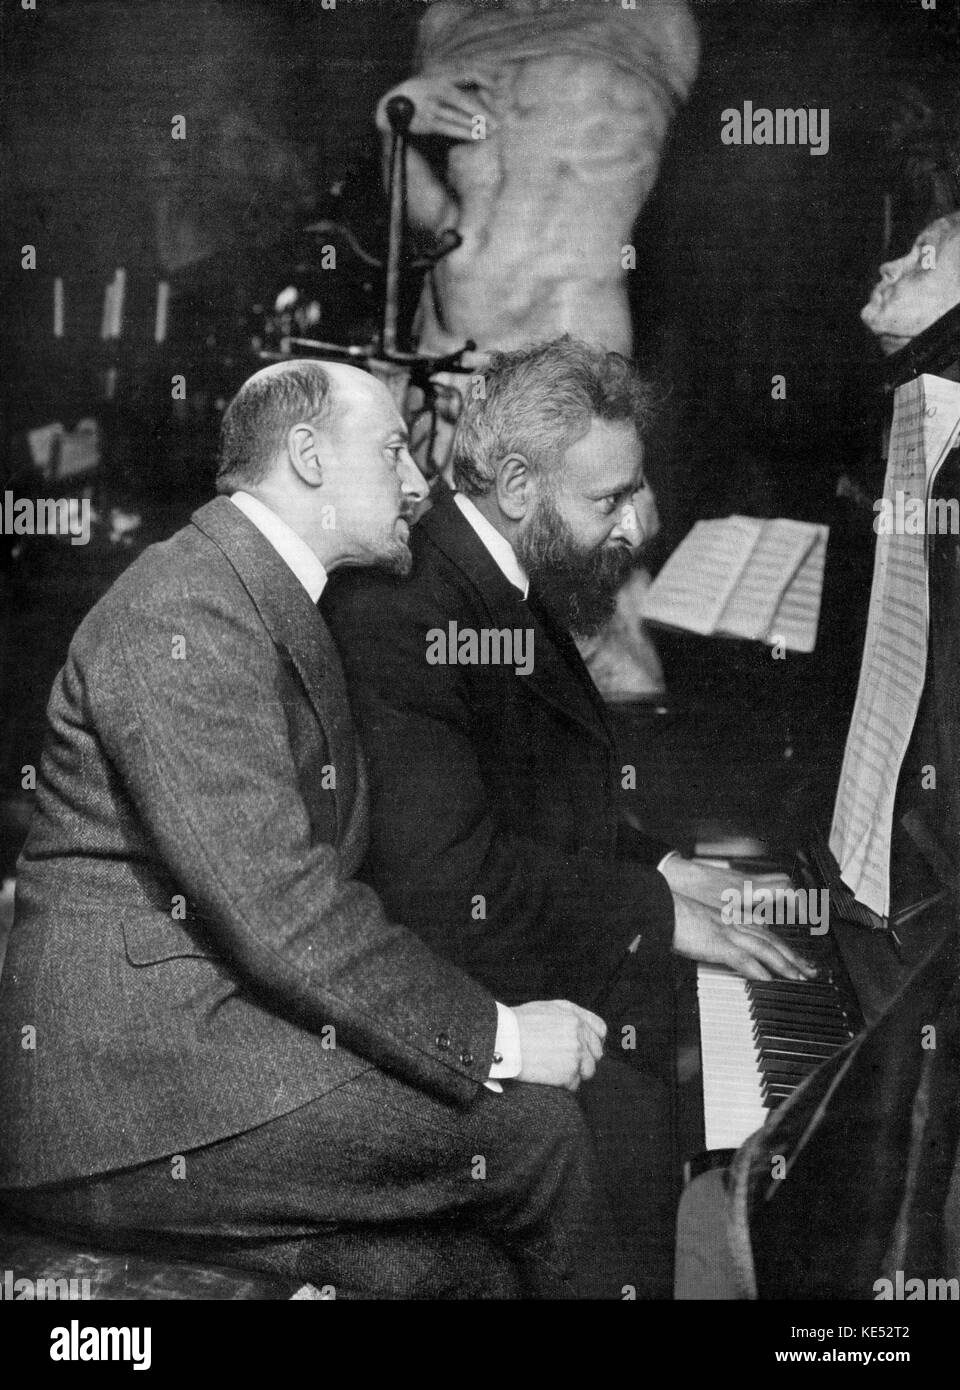 Gabriele d'Annunzio & Alberto Franchetti collaborating at the piano 1906. AF: Italian opera composer 18 September 1860 – 4 August 1942. G d'A:   Italian poet, journalist, novelist, dramatist,12 March 1863 – 1 March 1938 . Stock Photo